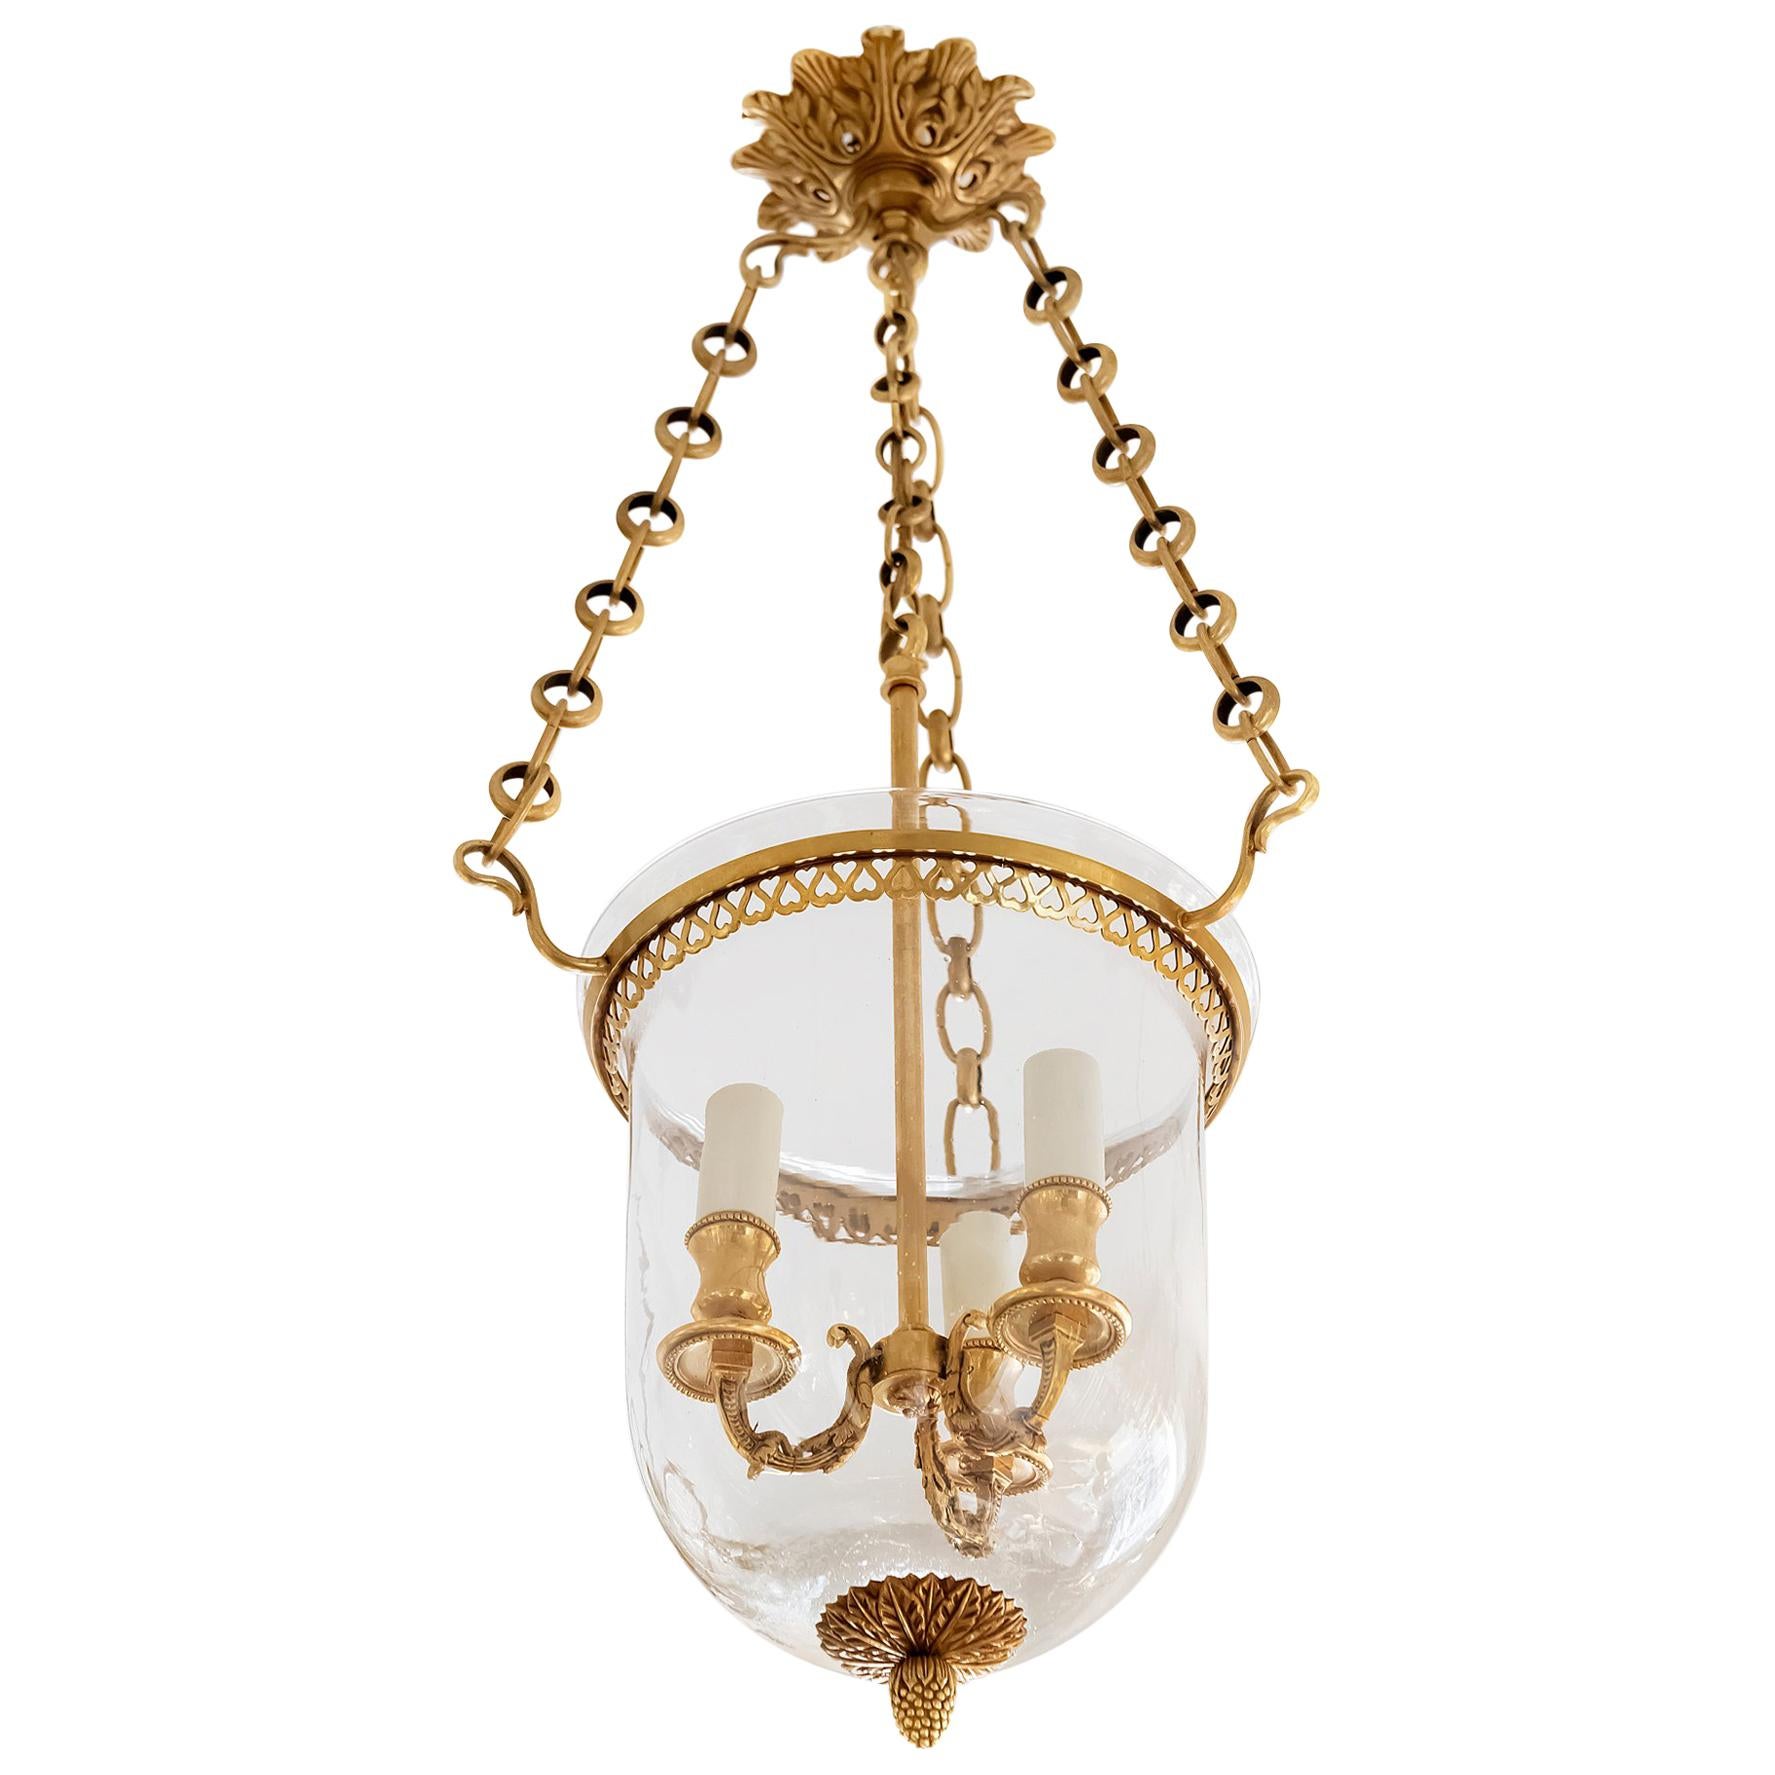 French Bronze and Glass Chandelier Lantern